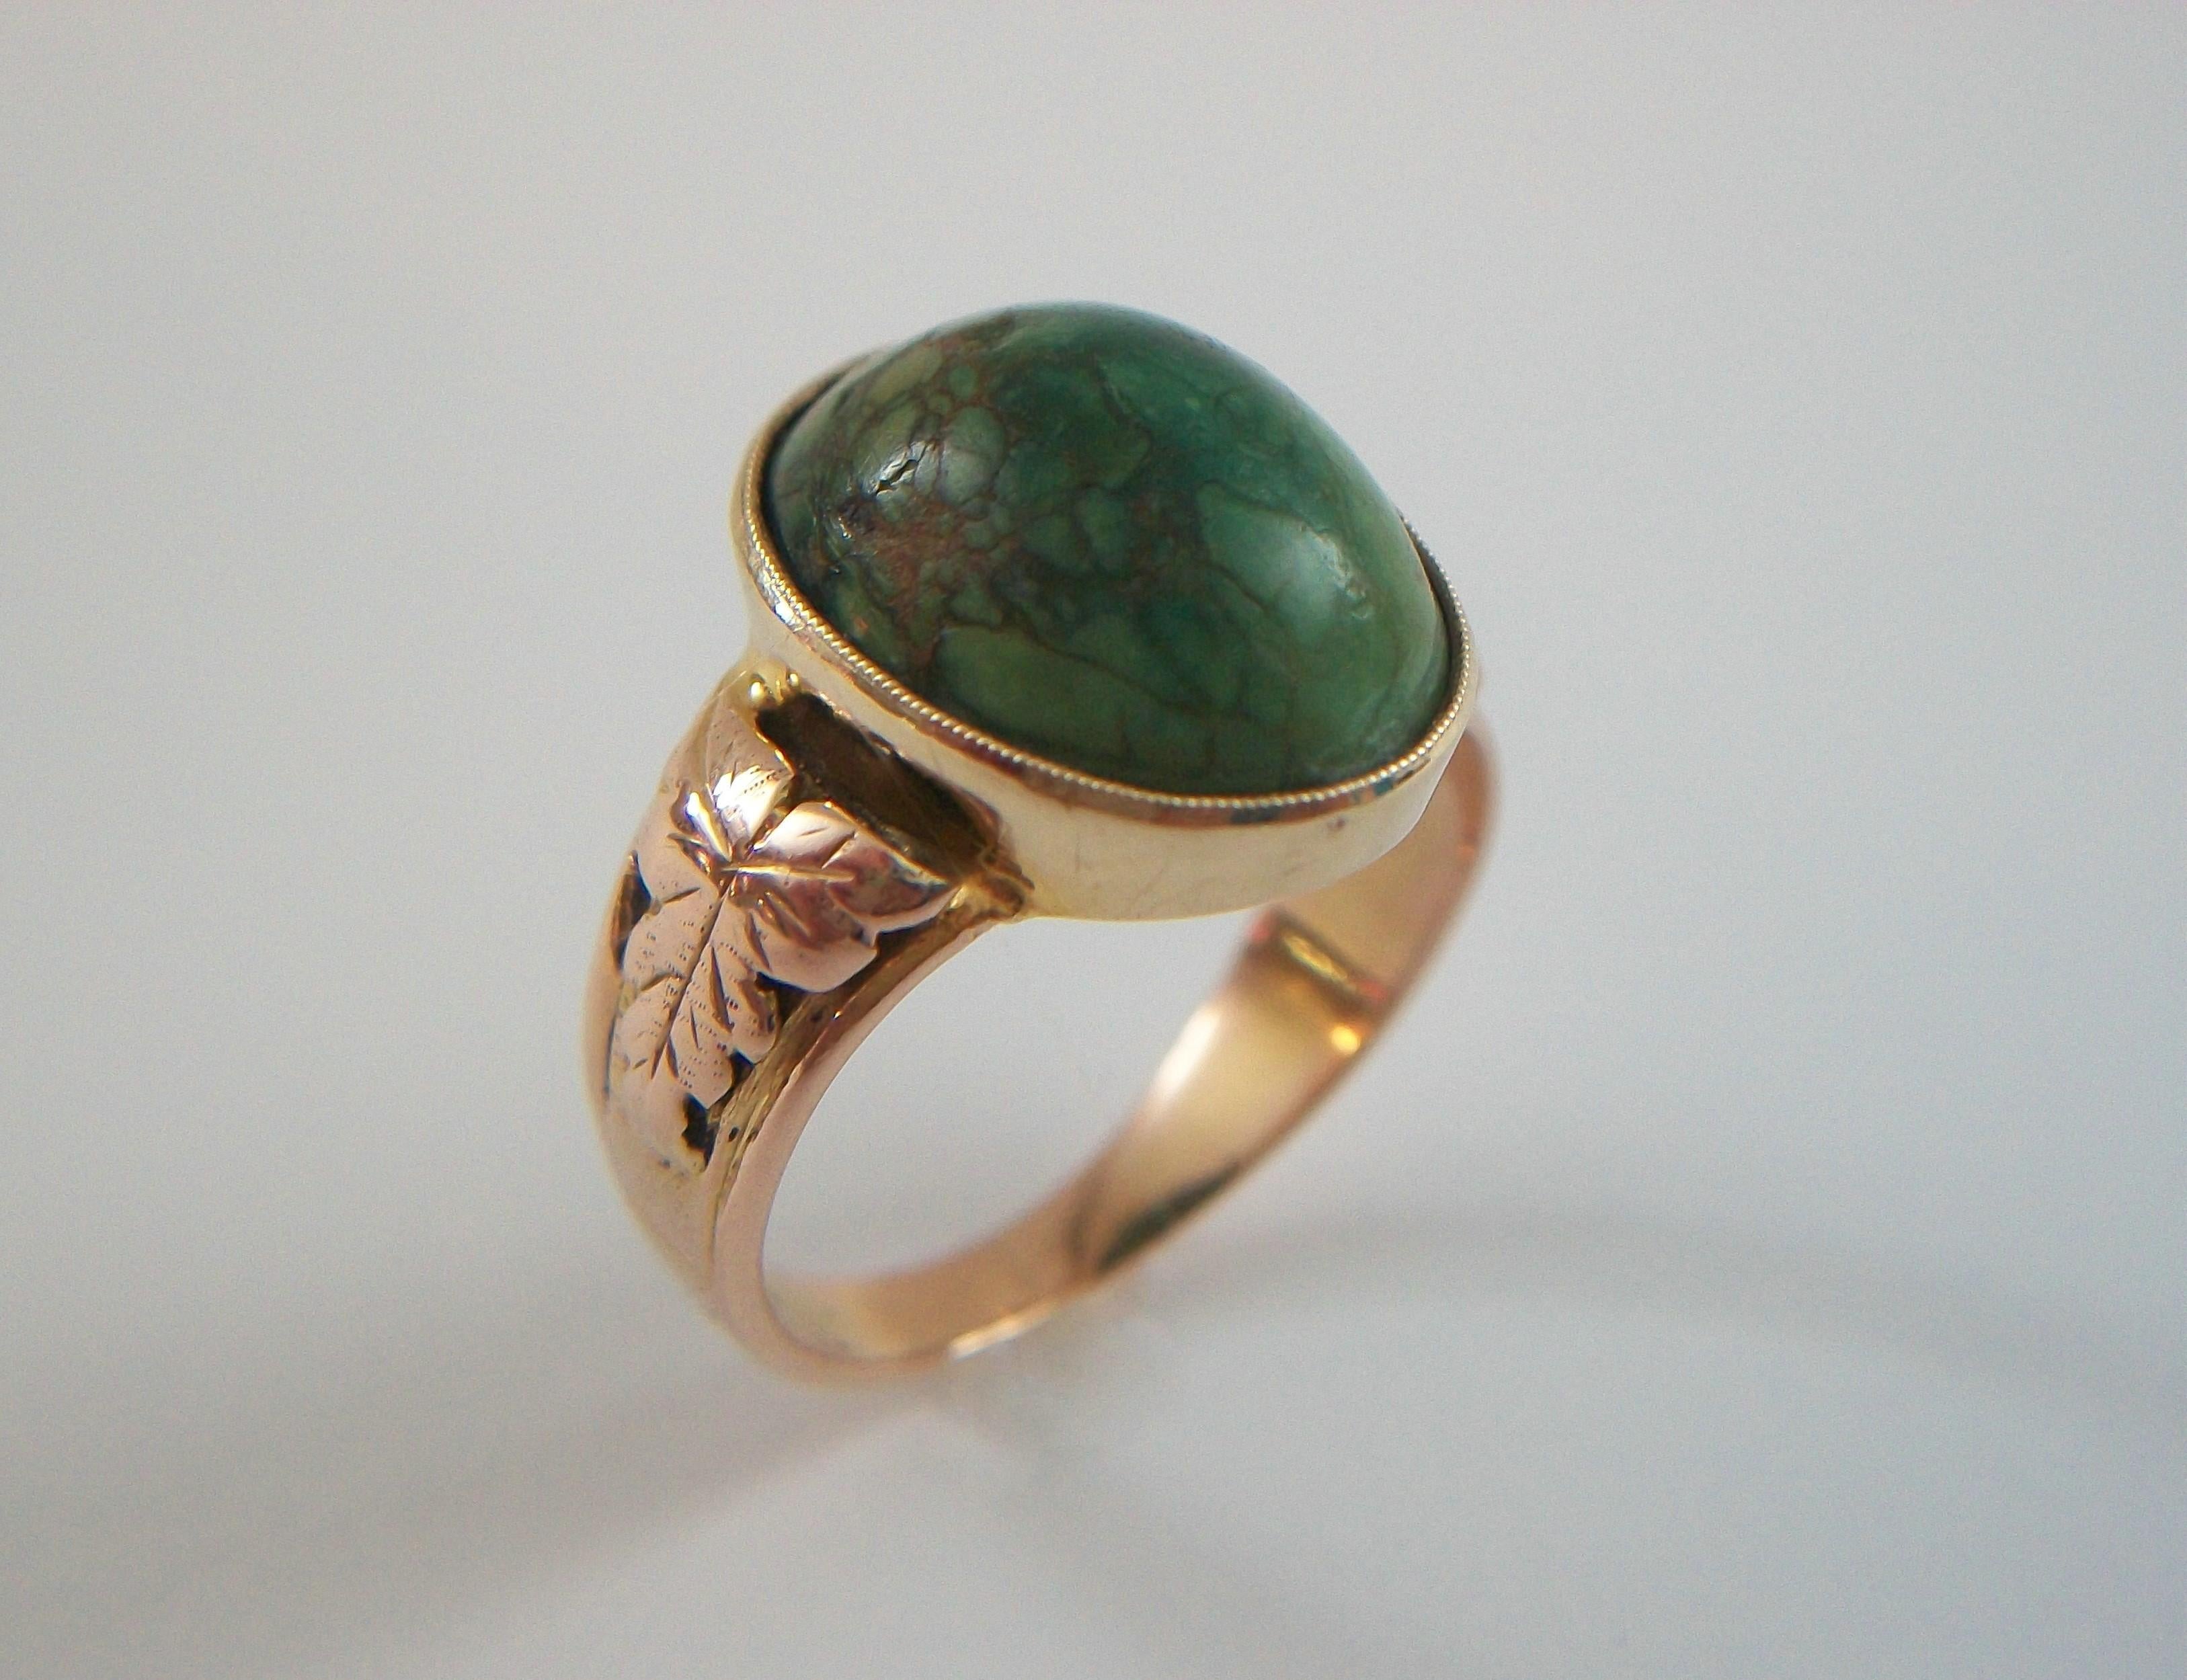 Victorian Turquoise and 18K yellow gold cocktail ring - hand made - featuring a milgrain set natural oval cabochon Turquoise (approx. 8.73 carats - 14 x 11 x 7.5 mm.) - the shoulders with applied acanthus leaf details - open setting from the back -